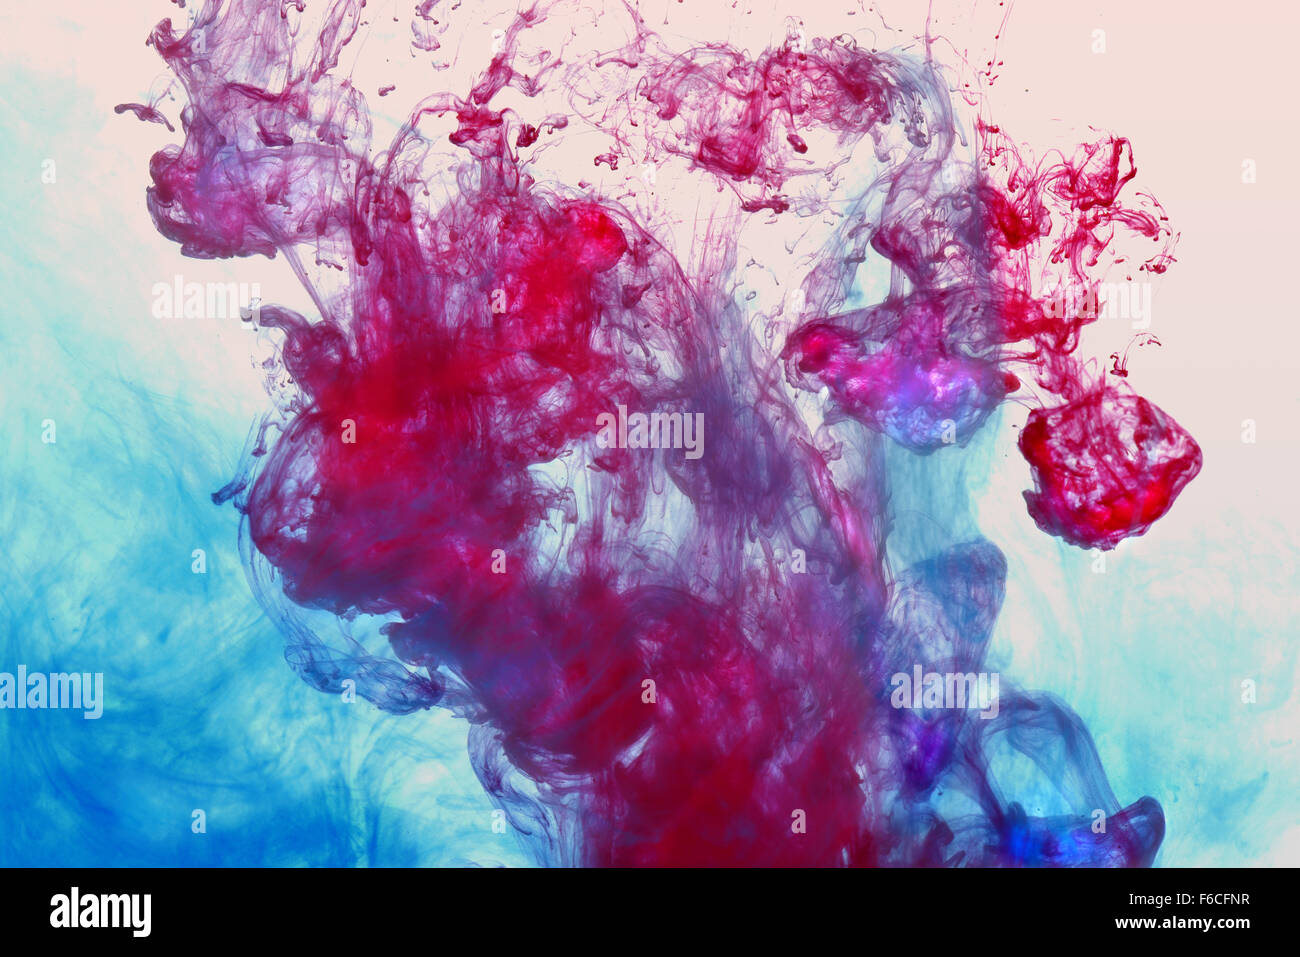 Colorful ink in water over light background Stock Photo